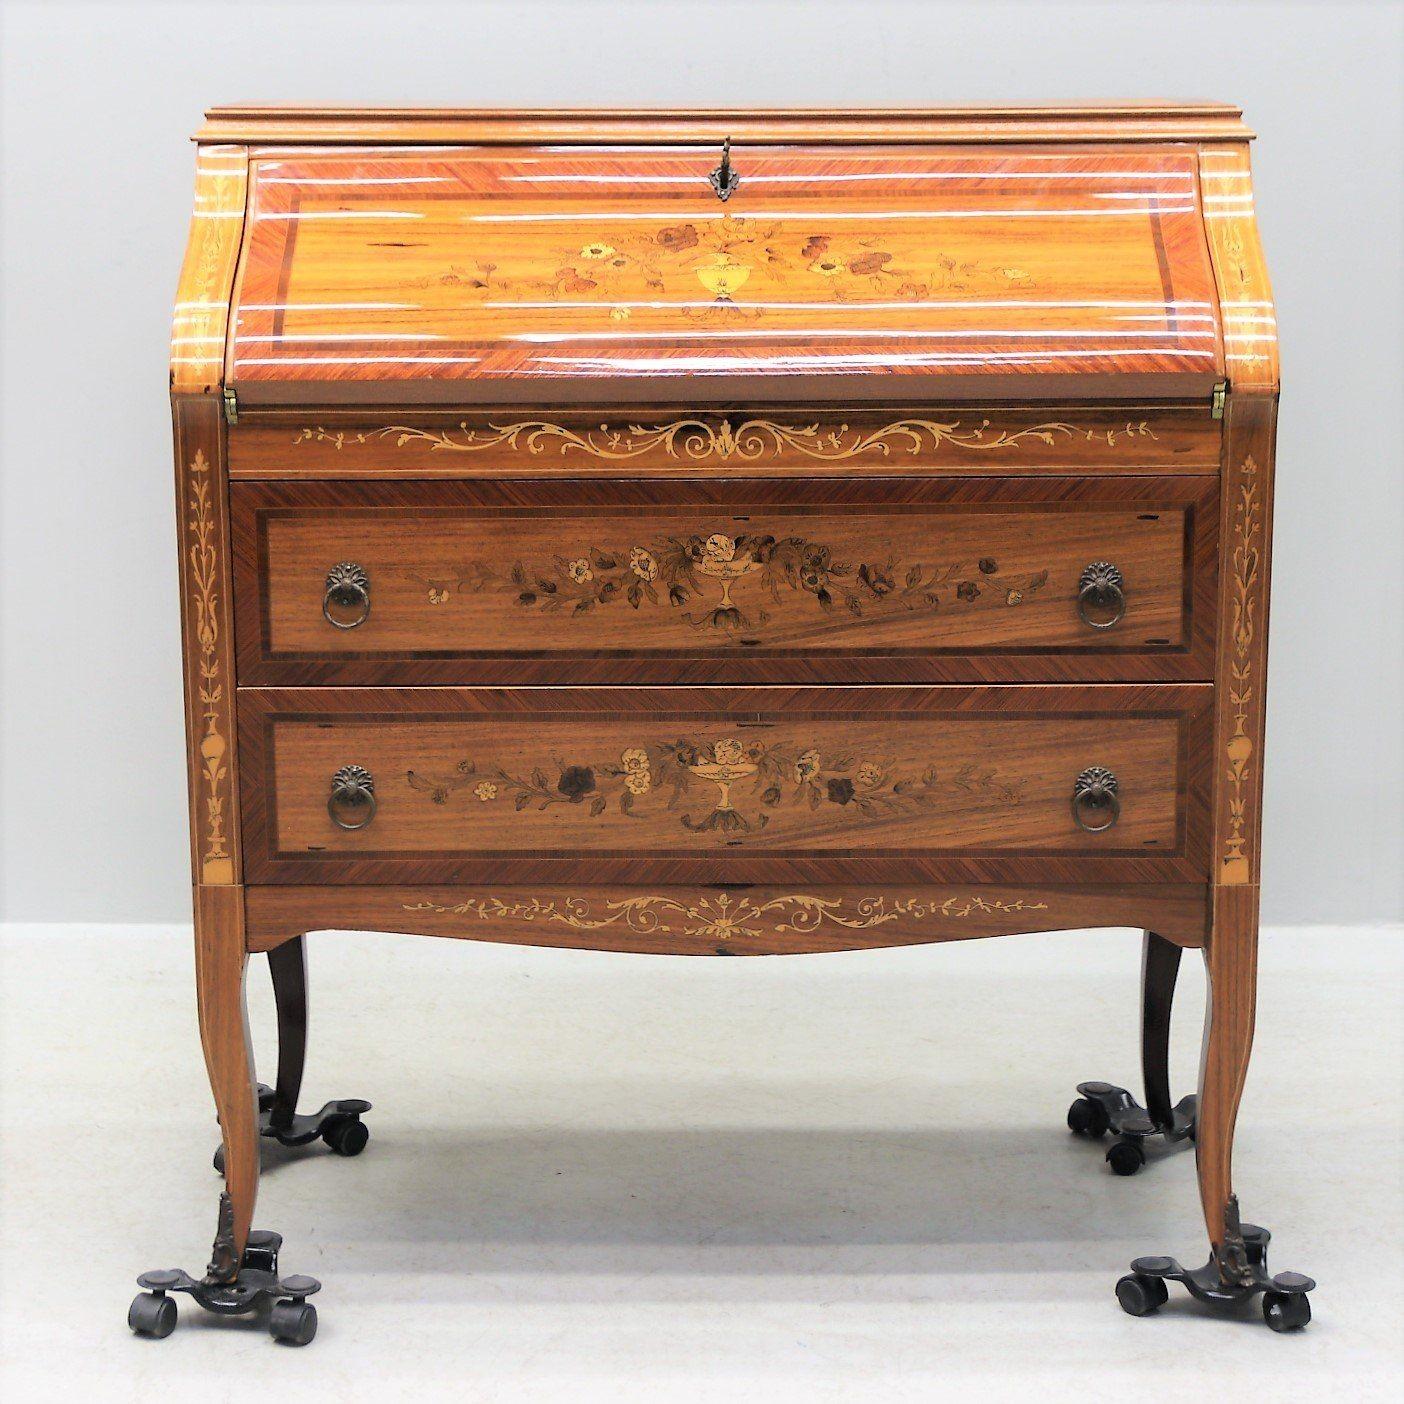 Gustavian Stunning Lacquered Inlay Secretary with Gorgeous Hardware For Sale